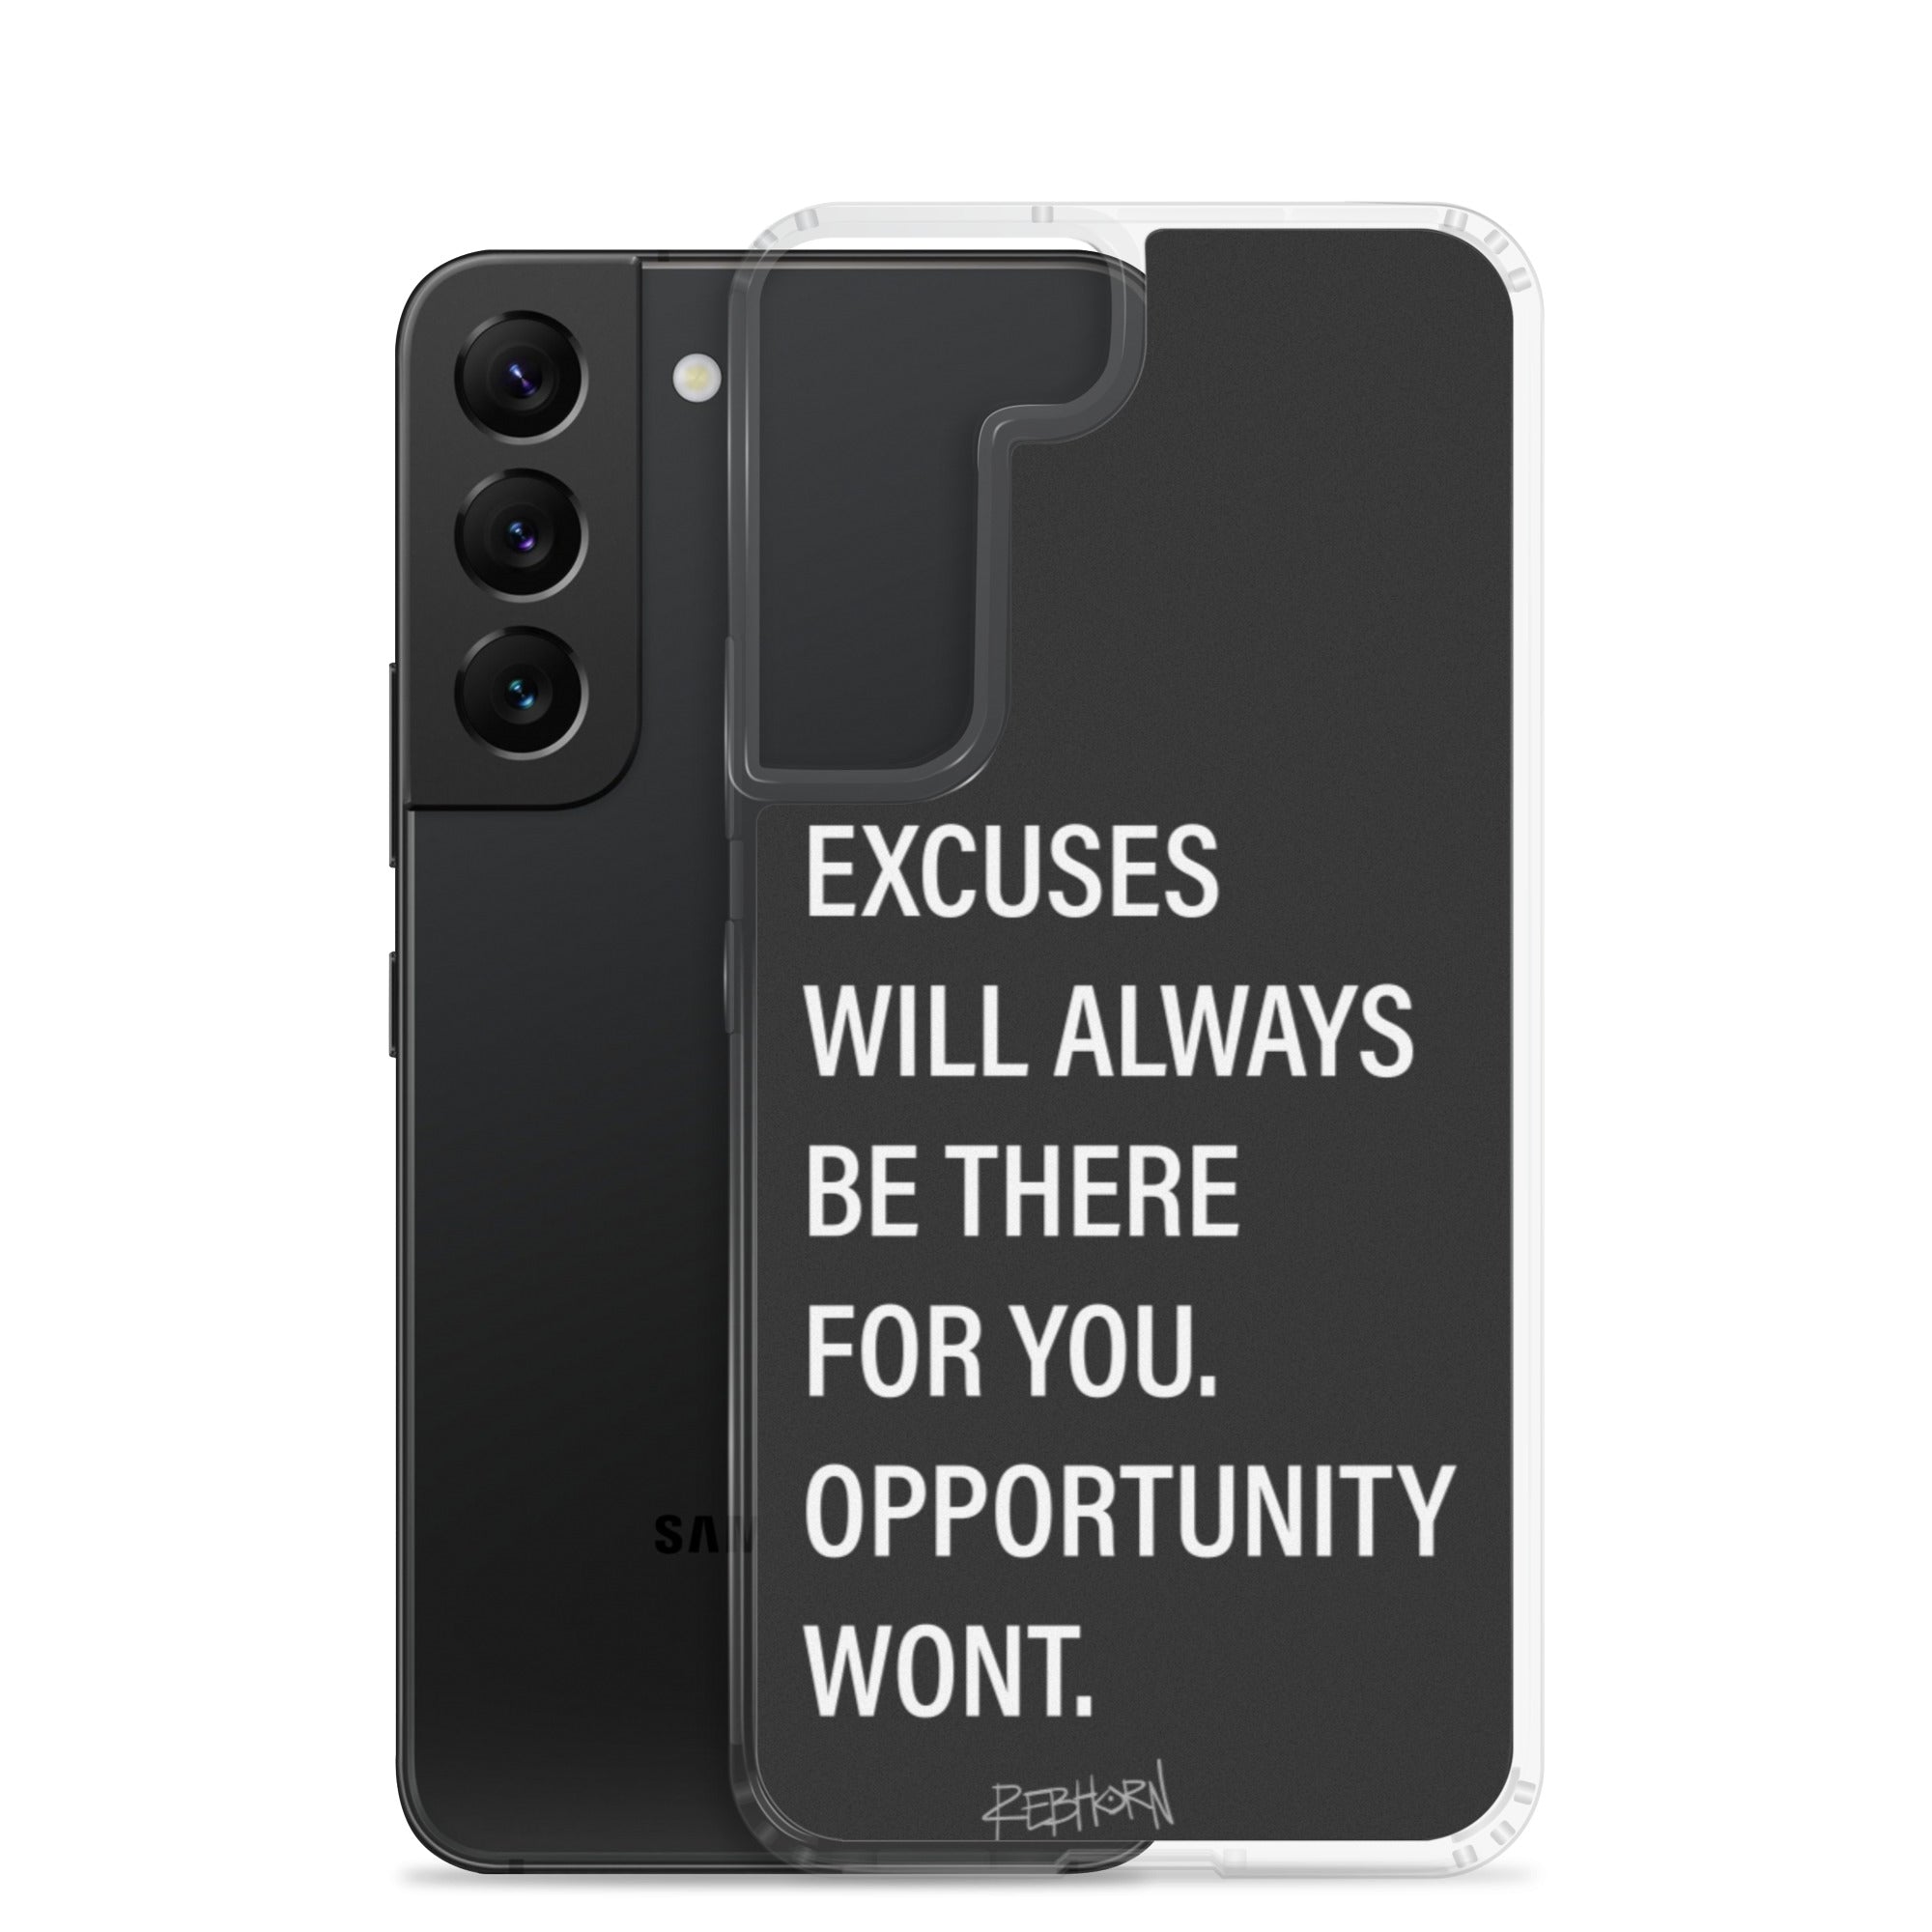 Excuses Will Always Be There Samsung Case - REBHORN DESIGN